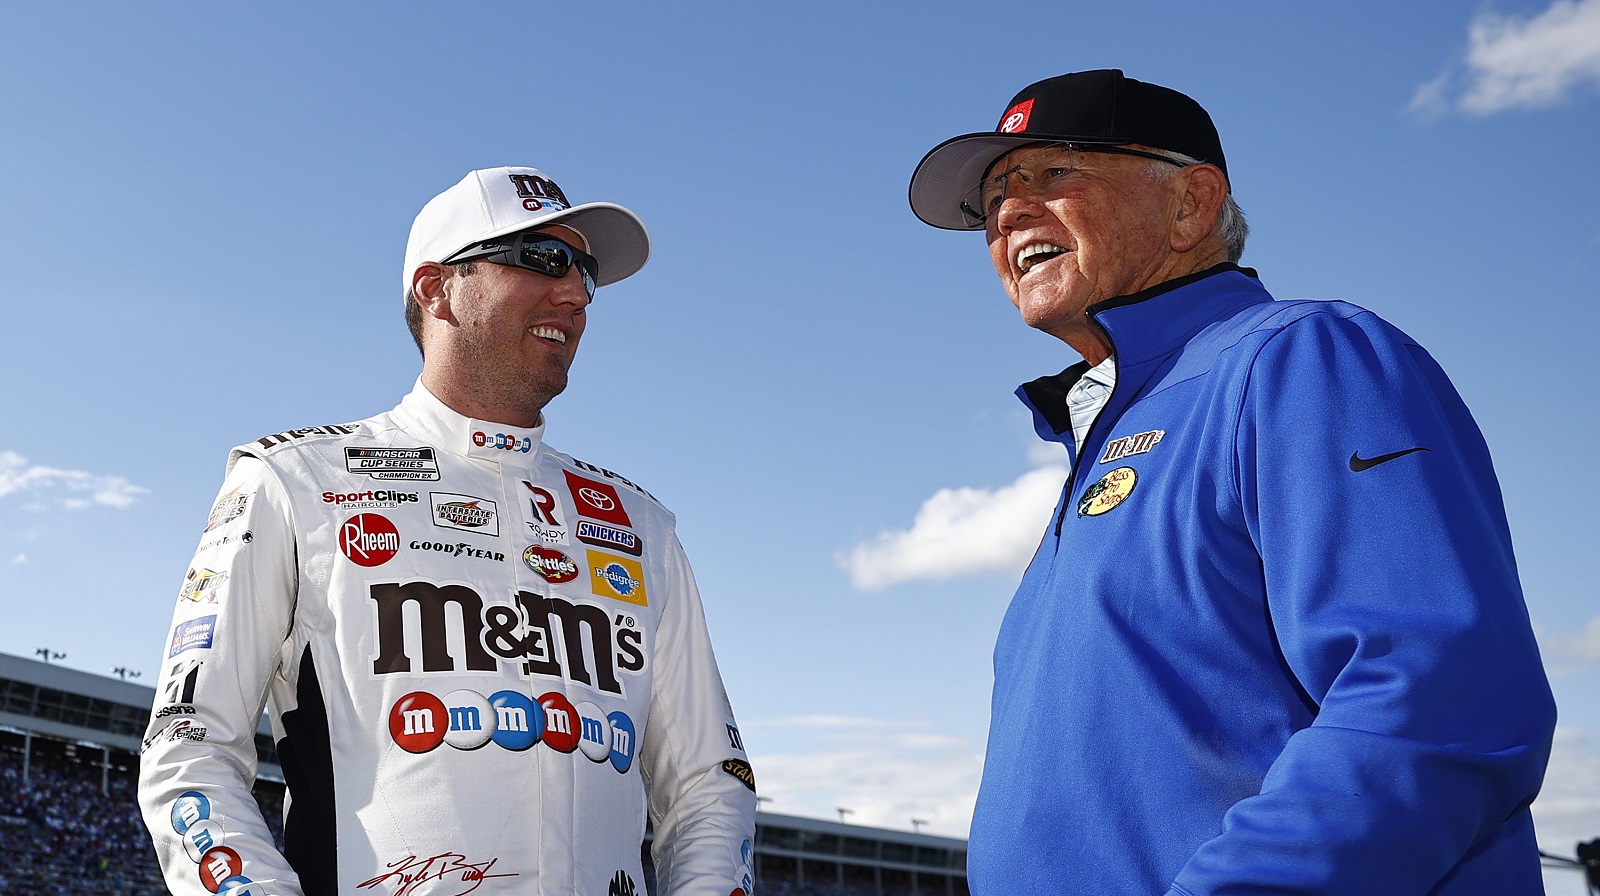 Kyle Busch, driver of the No. 18 Toyota, and team owner Joe Gibbs talk prior to the NASCAR Cup Series Coca-Cola 600 at Charlotte Motor Speedway on May 30, 2021. | Jared C. Tilton/Getty Images